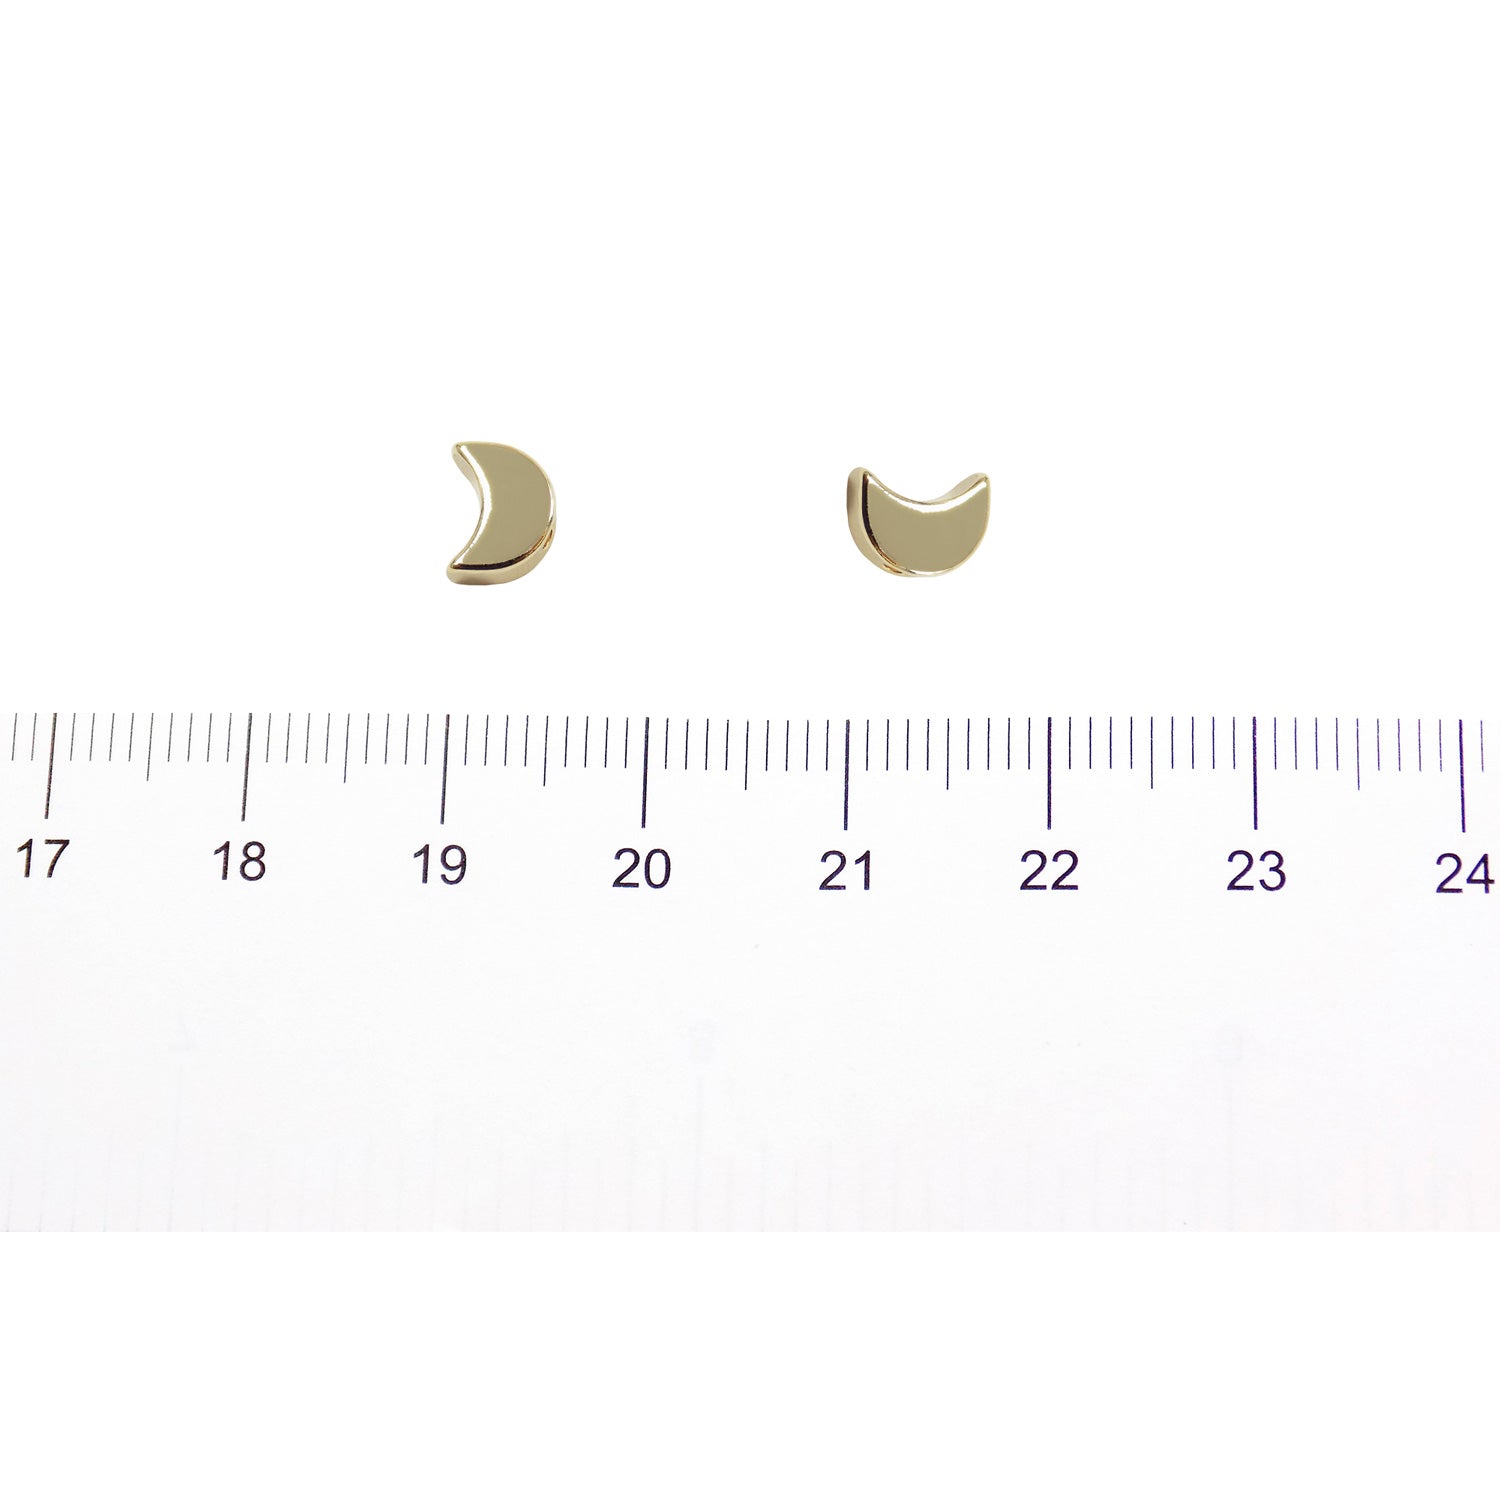 Tiny Moon Slider Charm (6 pieces) Gold Plated Mini Half Moon Spacer Beads for Necklaces and Bracelets Connector for Jewelry Making